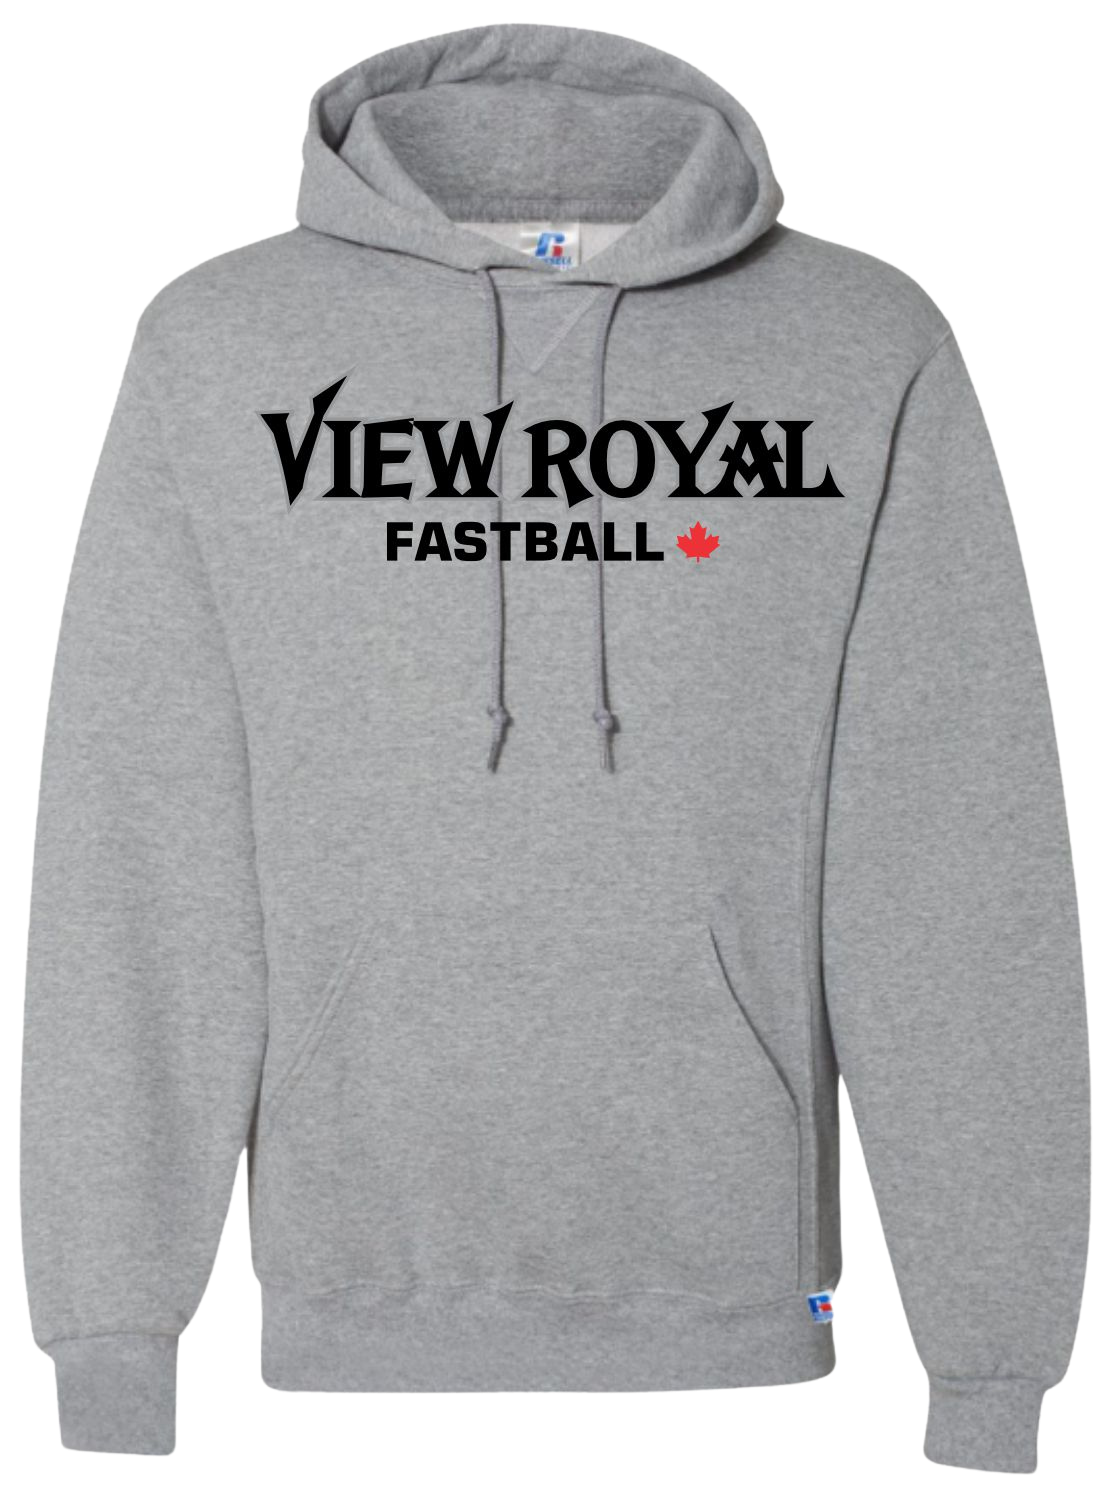 View Royal Fastball Youth and Unisex Pullover Russell Hoodie